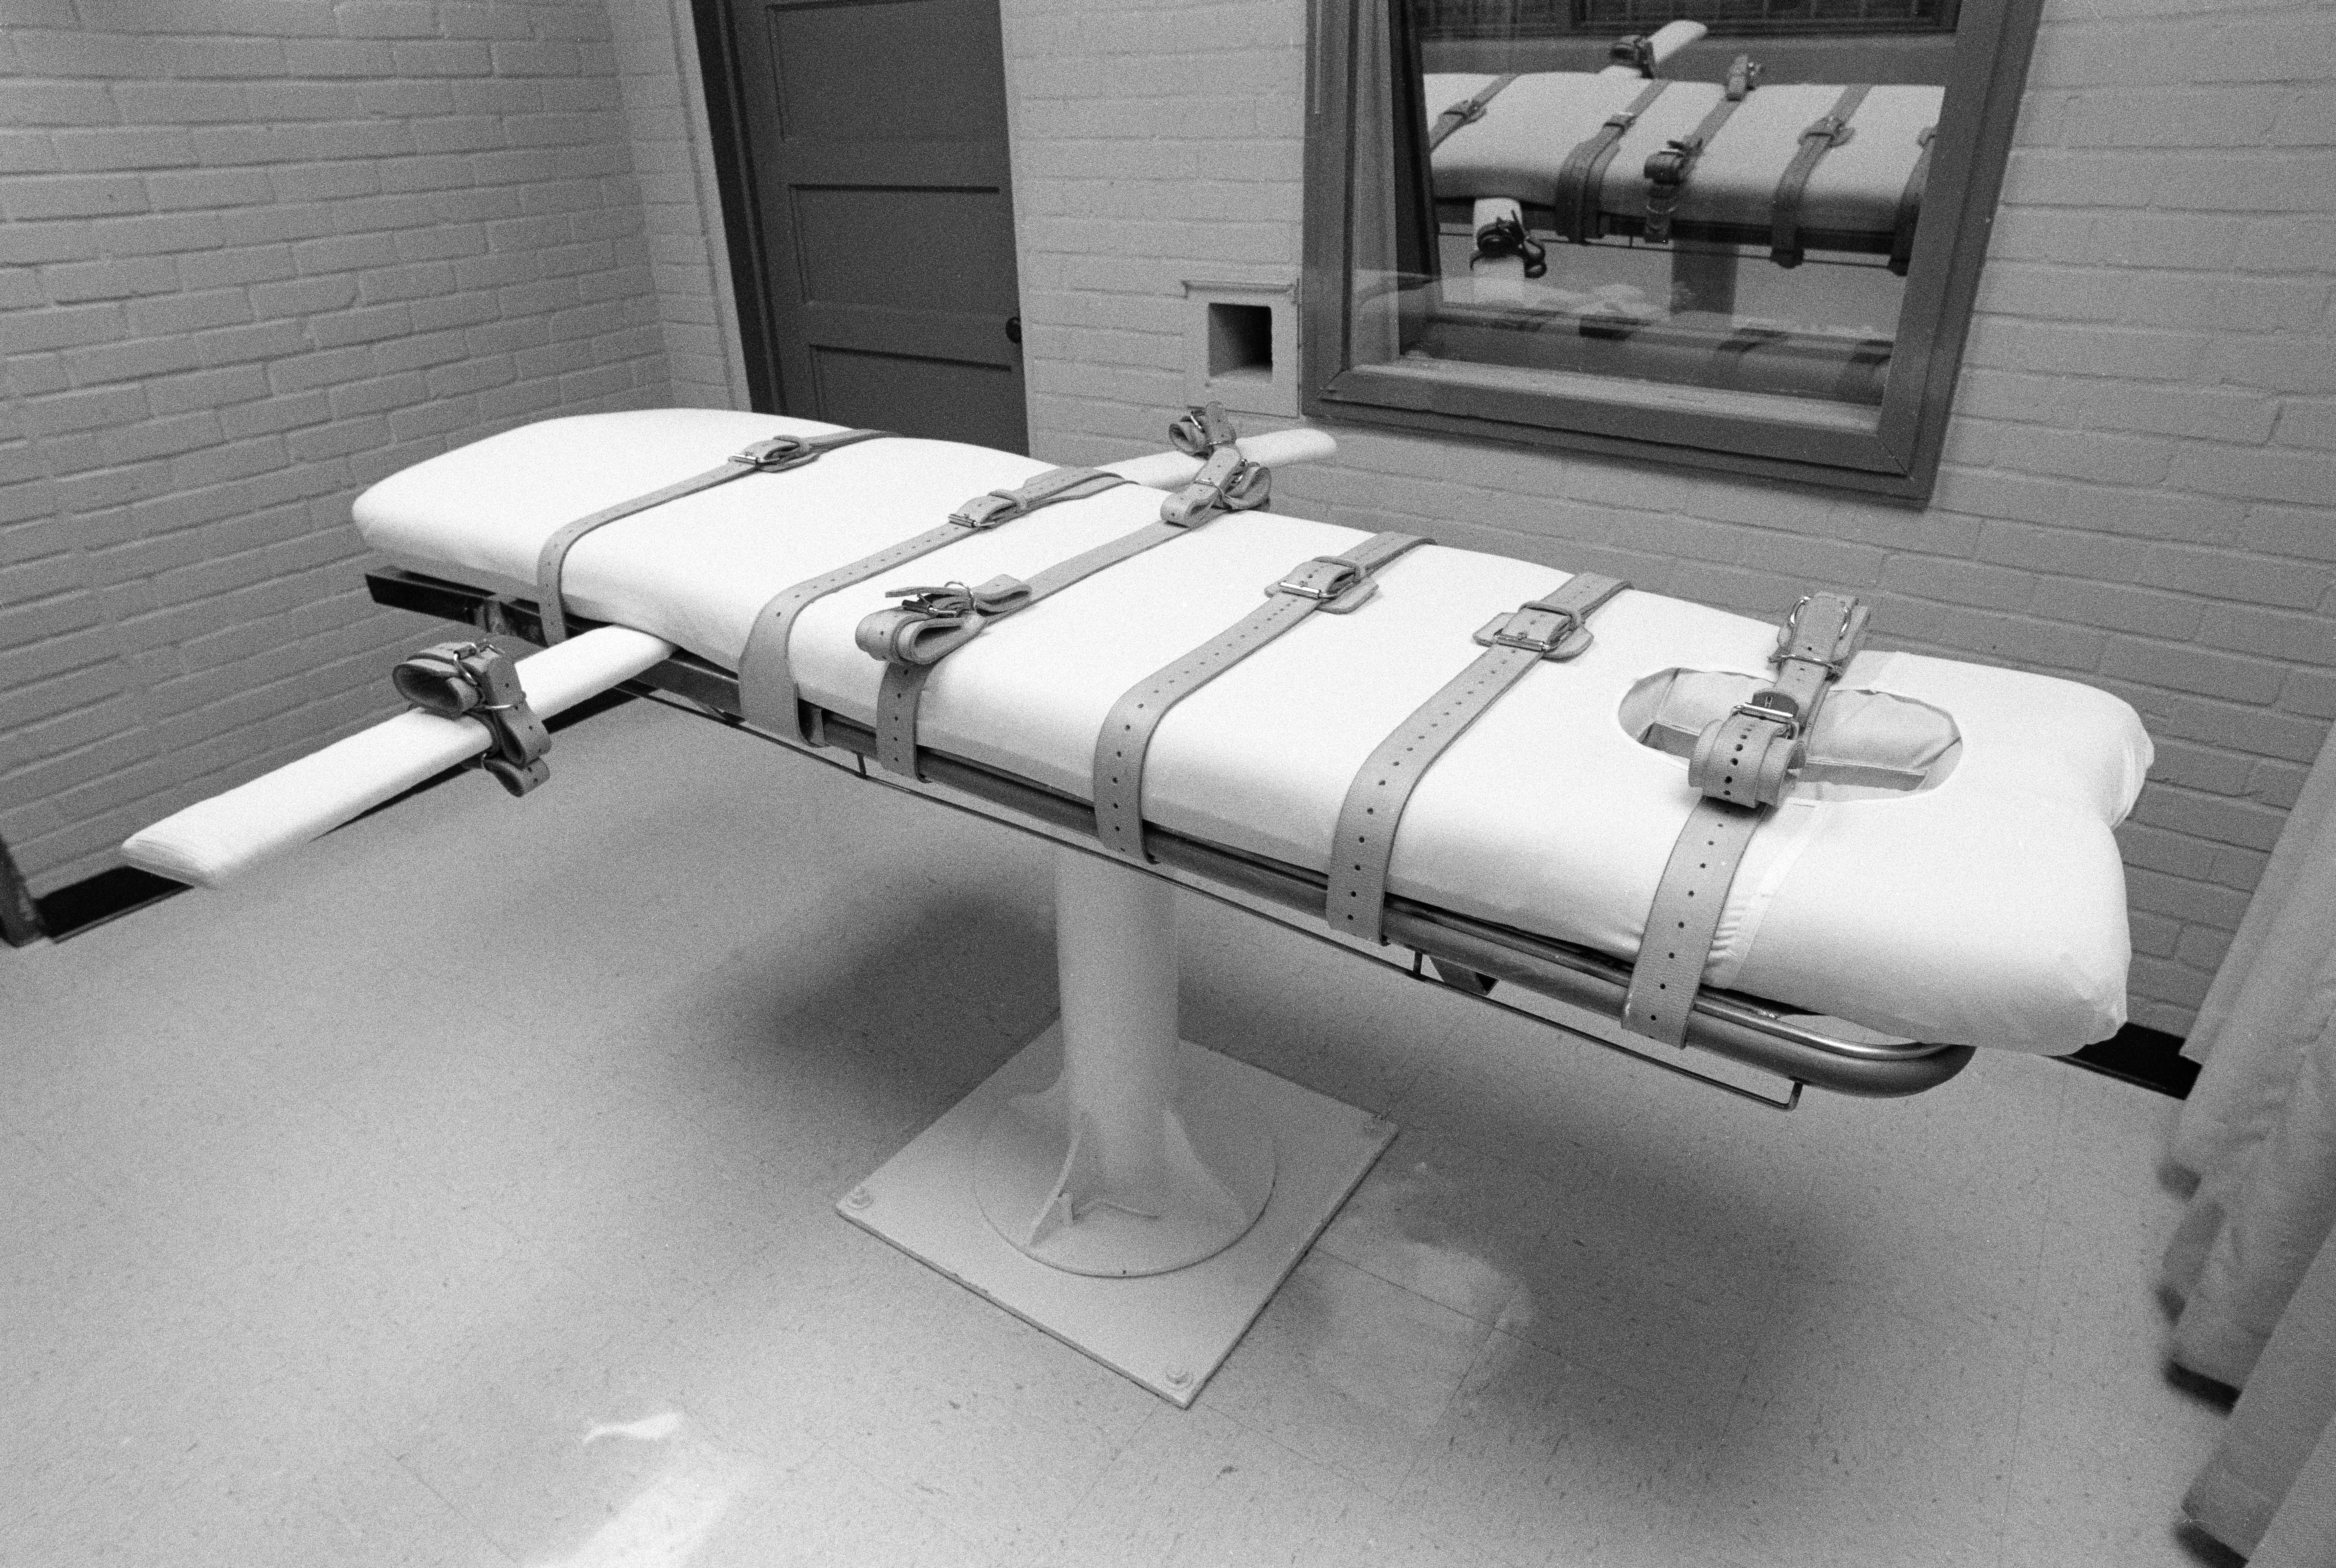 Missouri Death Row Inmate Executed After 18 Years for Killing Cousin and Her Husband